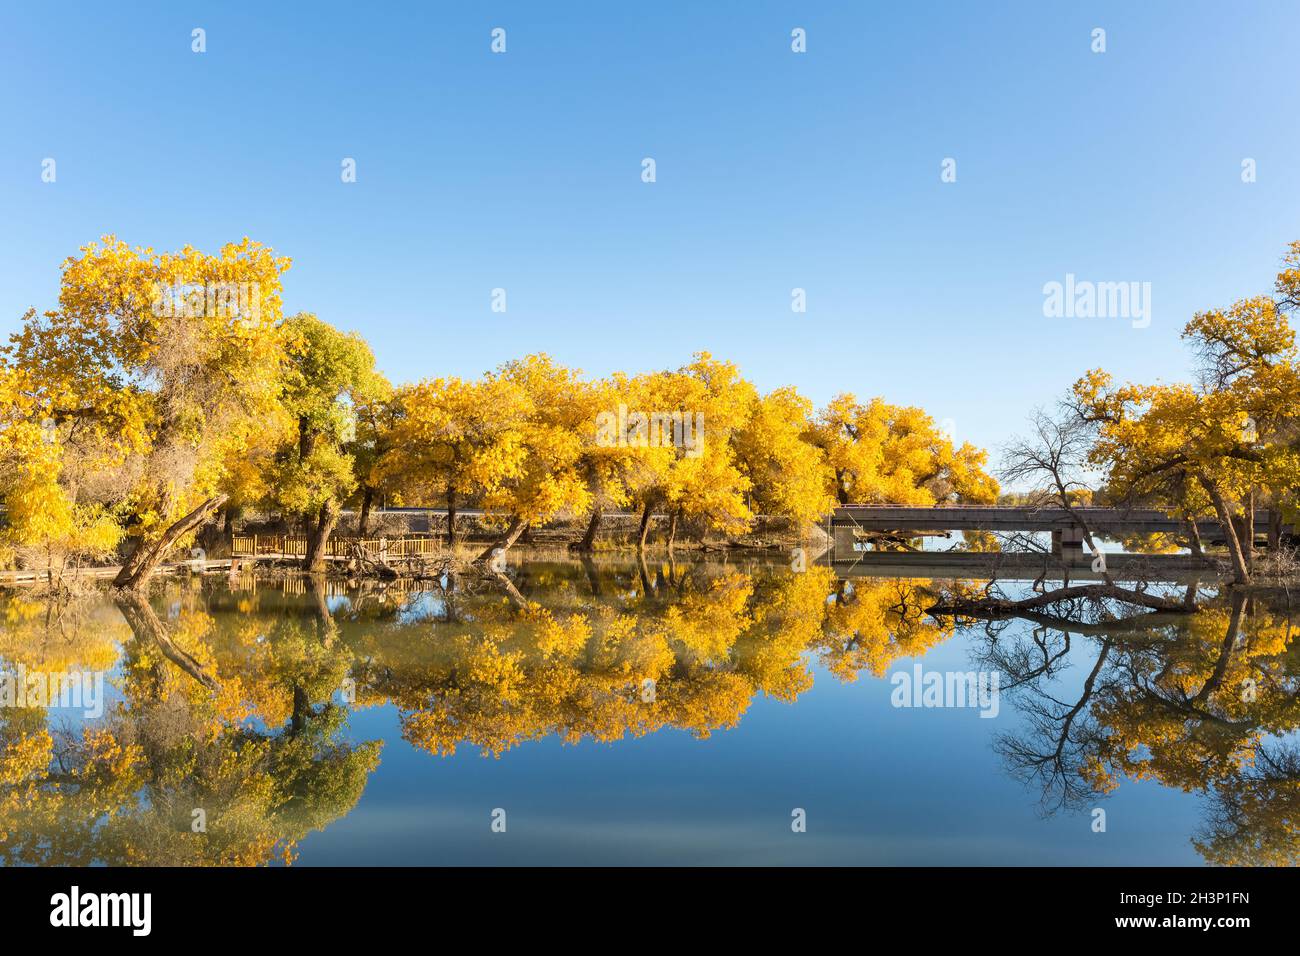 Golden euphrates poplar forests in ejina Stock Photo